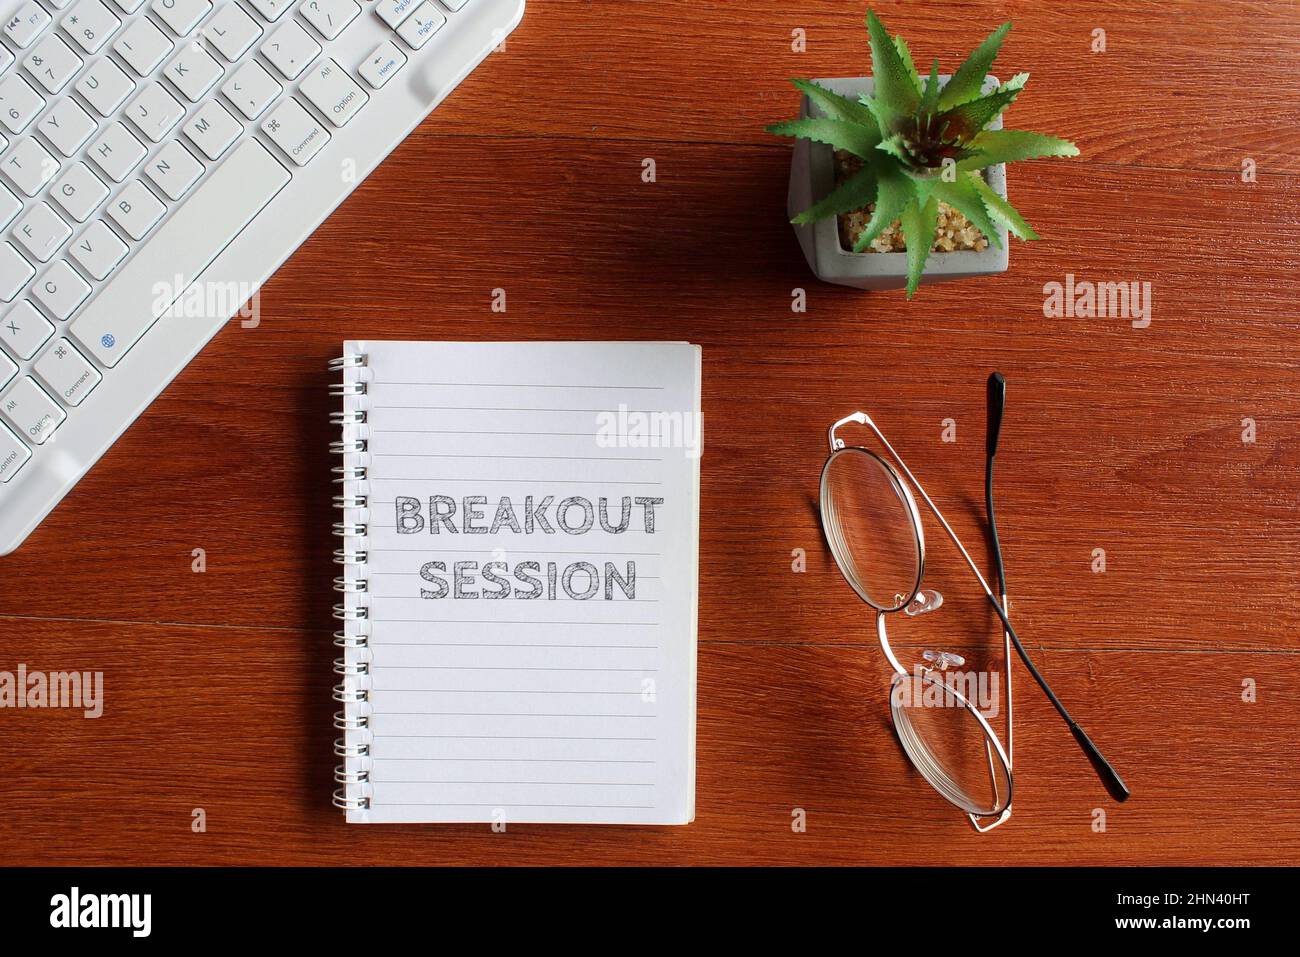 Top view image of keyboard, glasses and notebook with text BREAKOUT SESSION. Stock Photo